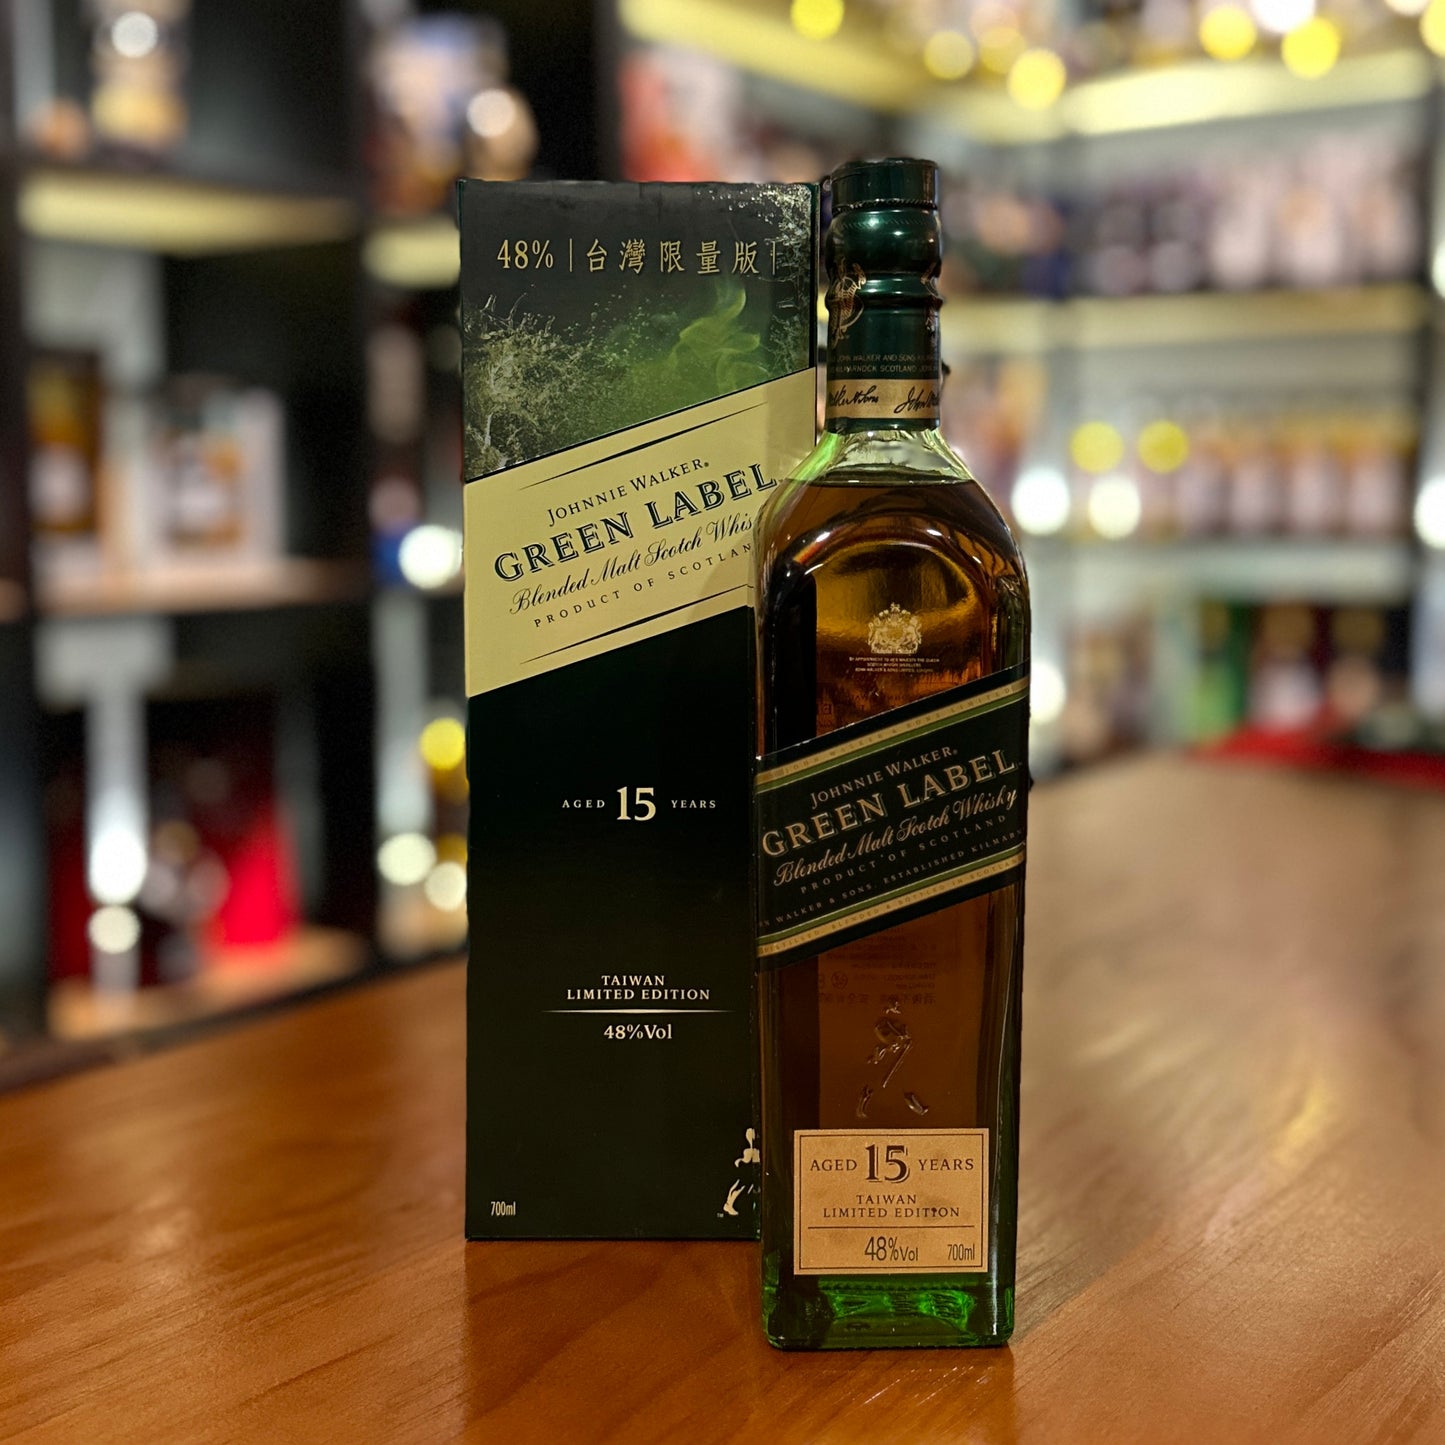 Johnnie Walker Green Label 15 Year Old Blended Malt Scotch Whisky (Taiwan Limited Edition)